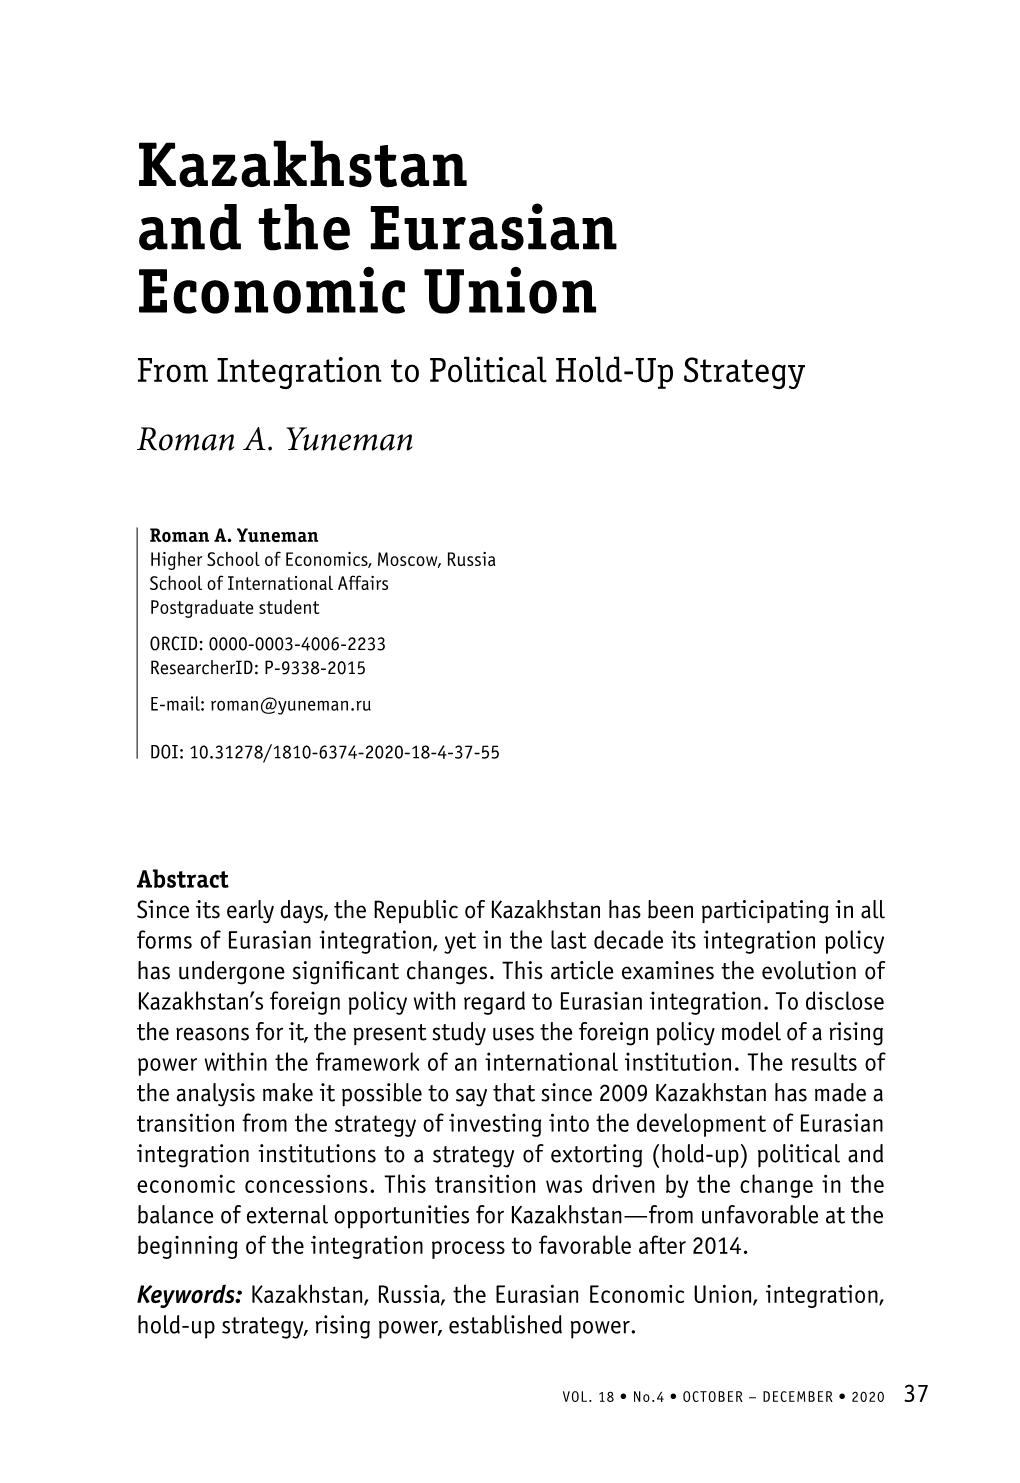 Kazakhstan and the Eurasian Economic Union from Integration to Political Hold-Up Strategy